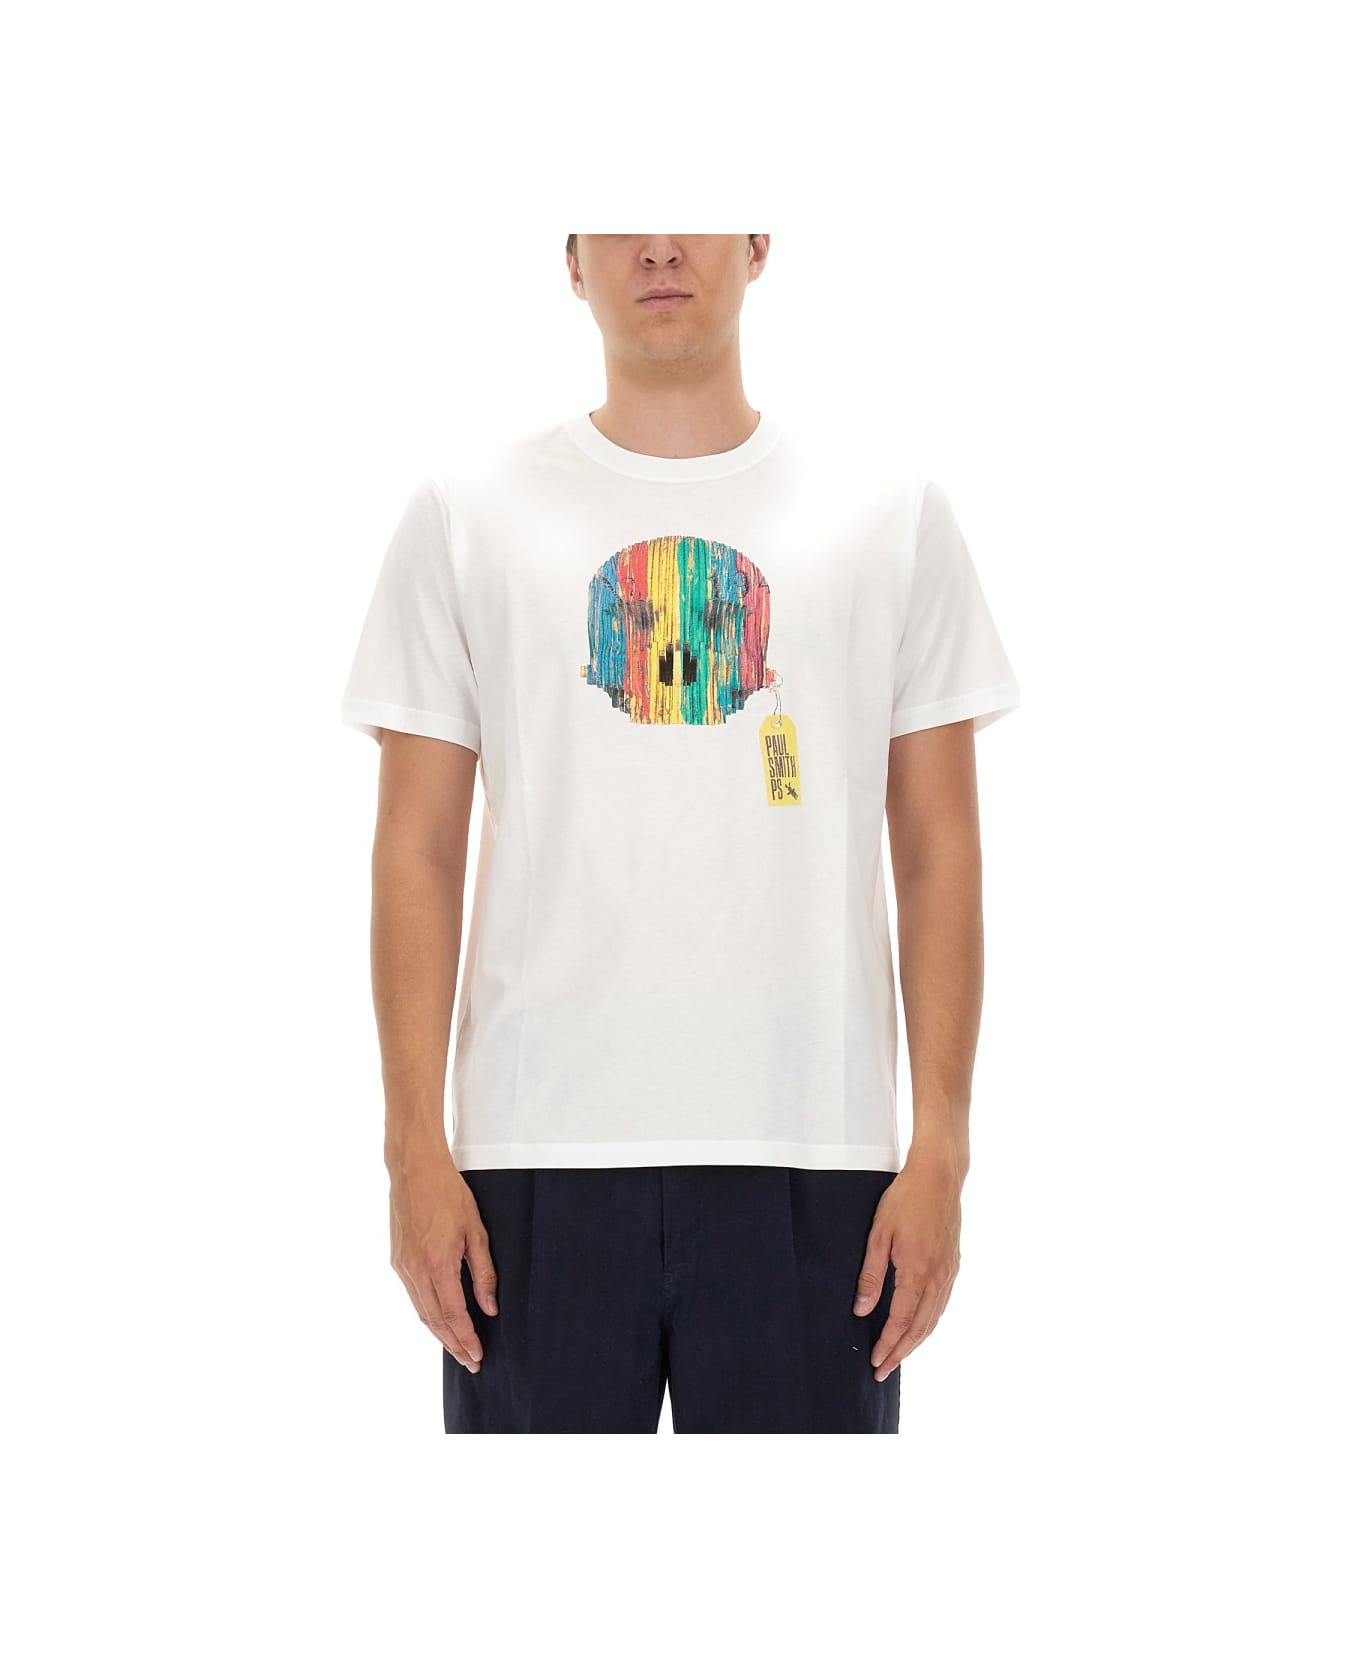 PS by Paul Smith Wooden Skull Print T-shirt - WHITE